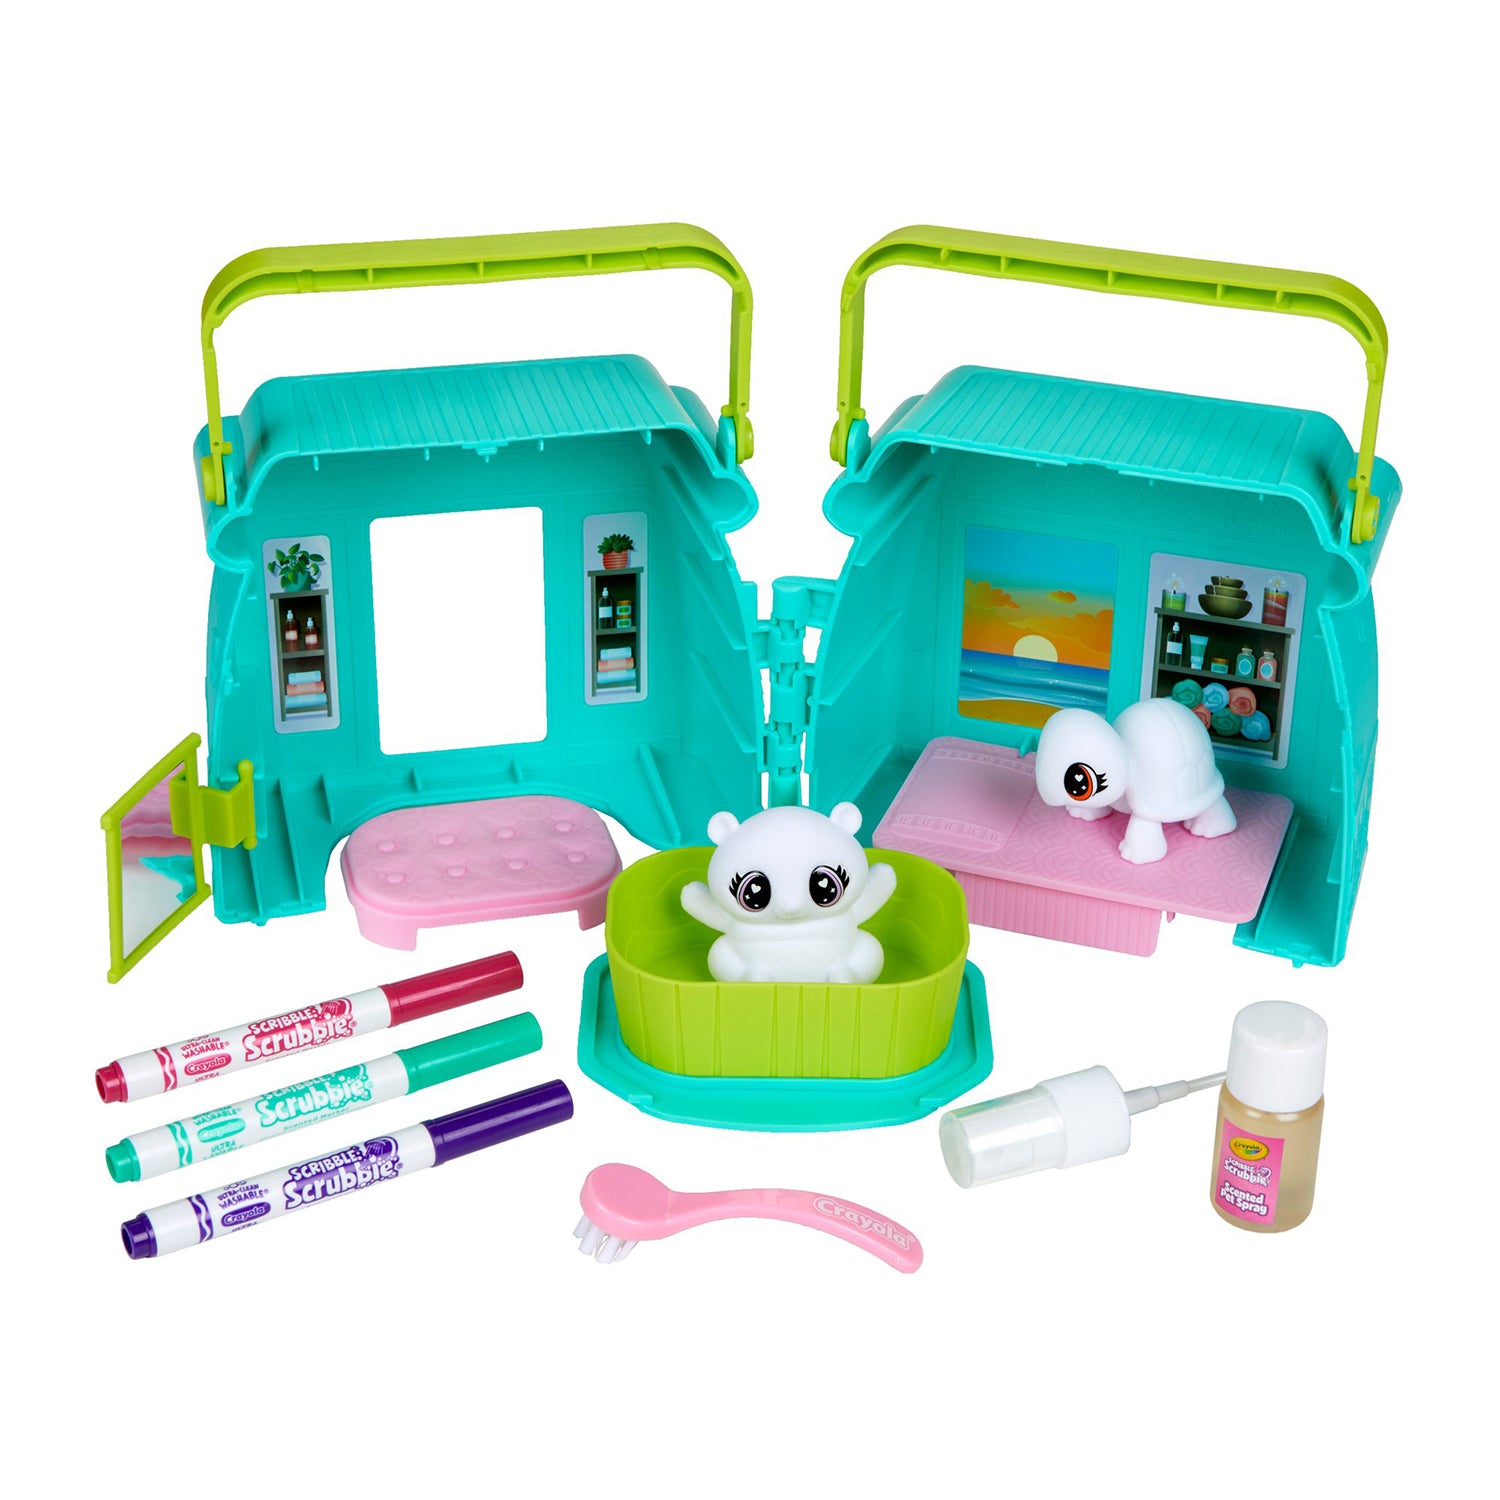 Crayola Scribble Scrubbie Pets Scented Spa Playset